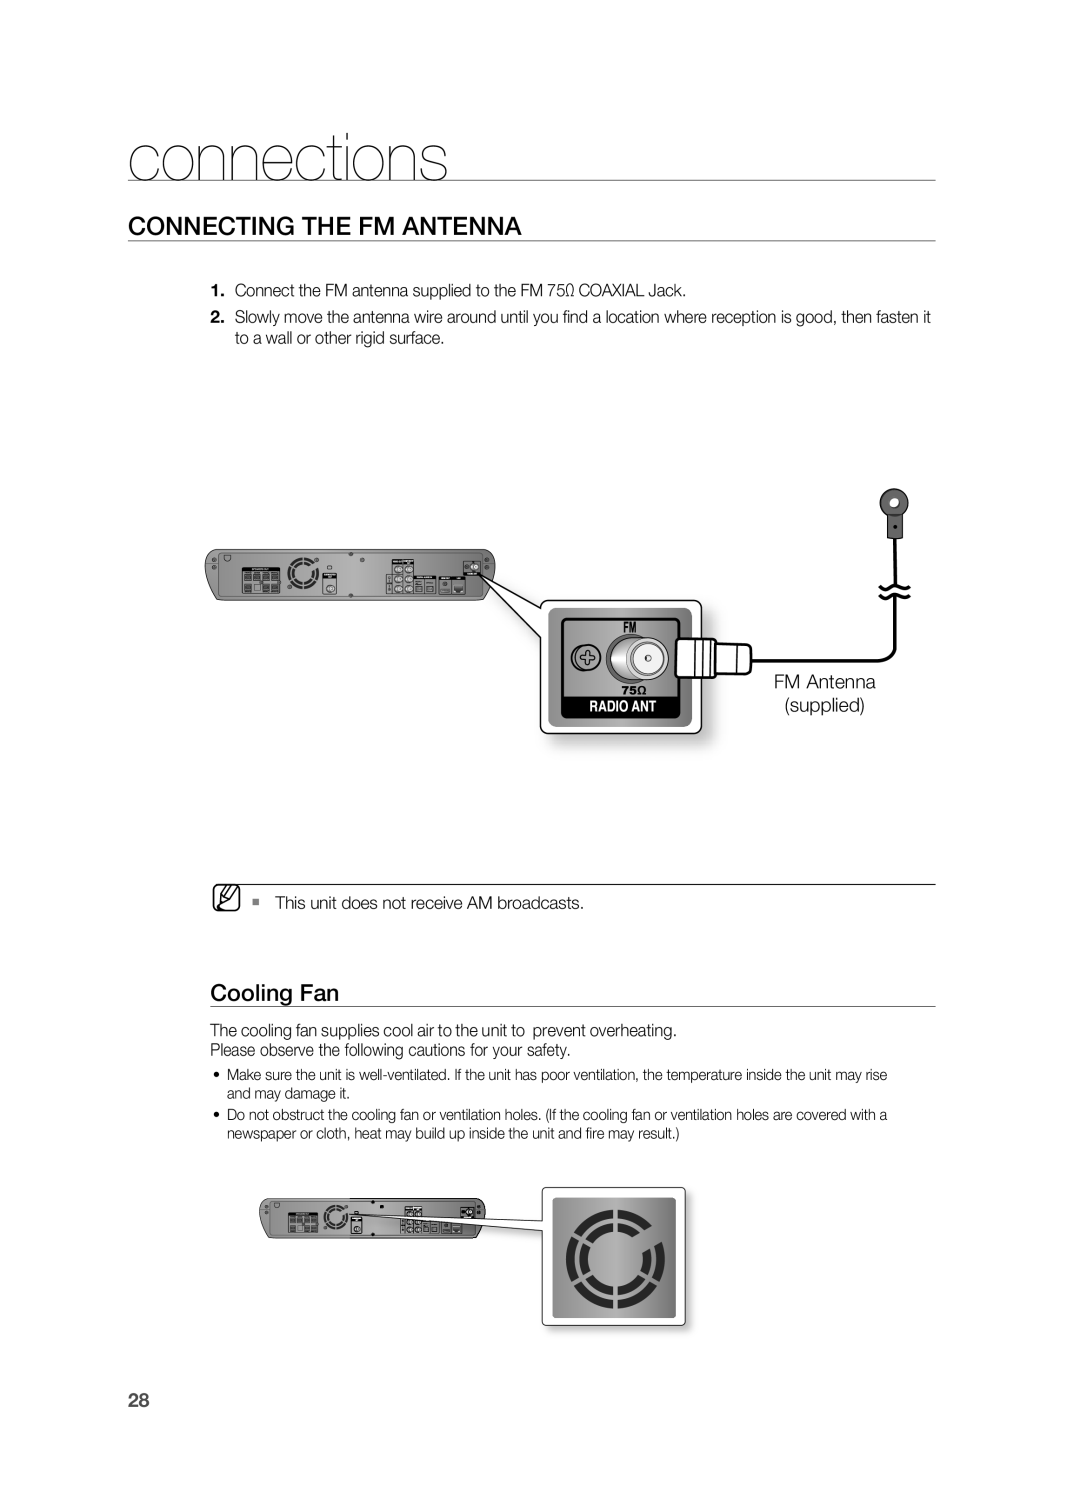 Samsung HT-BD2S manual Connecting the FM Antenna, Cooling Fan, connections 